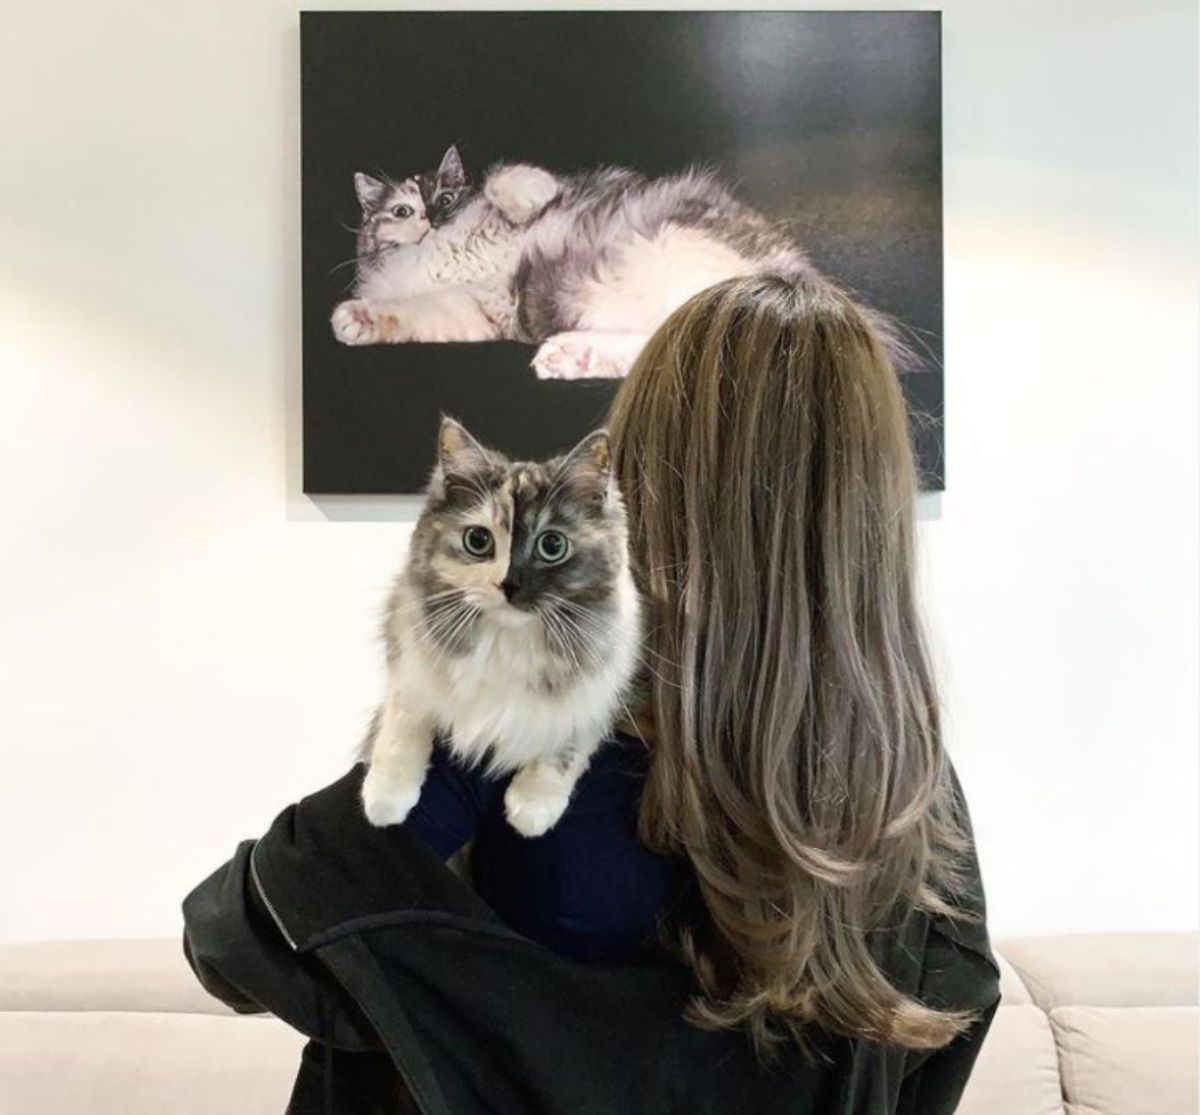 fluffy cat with right side of face being grey and left side being black being carried by a woman standing in front of a painting of the cat